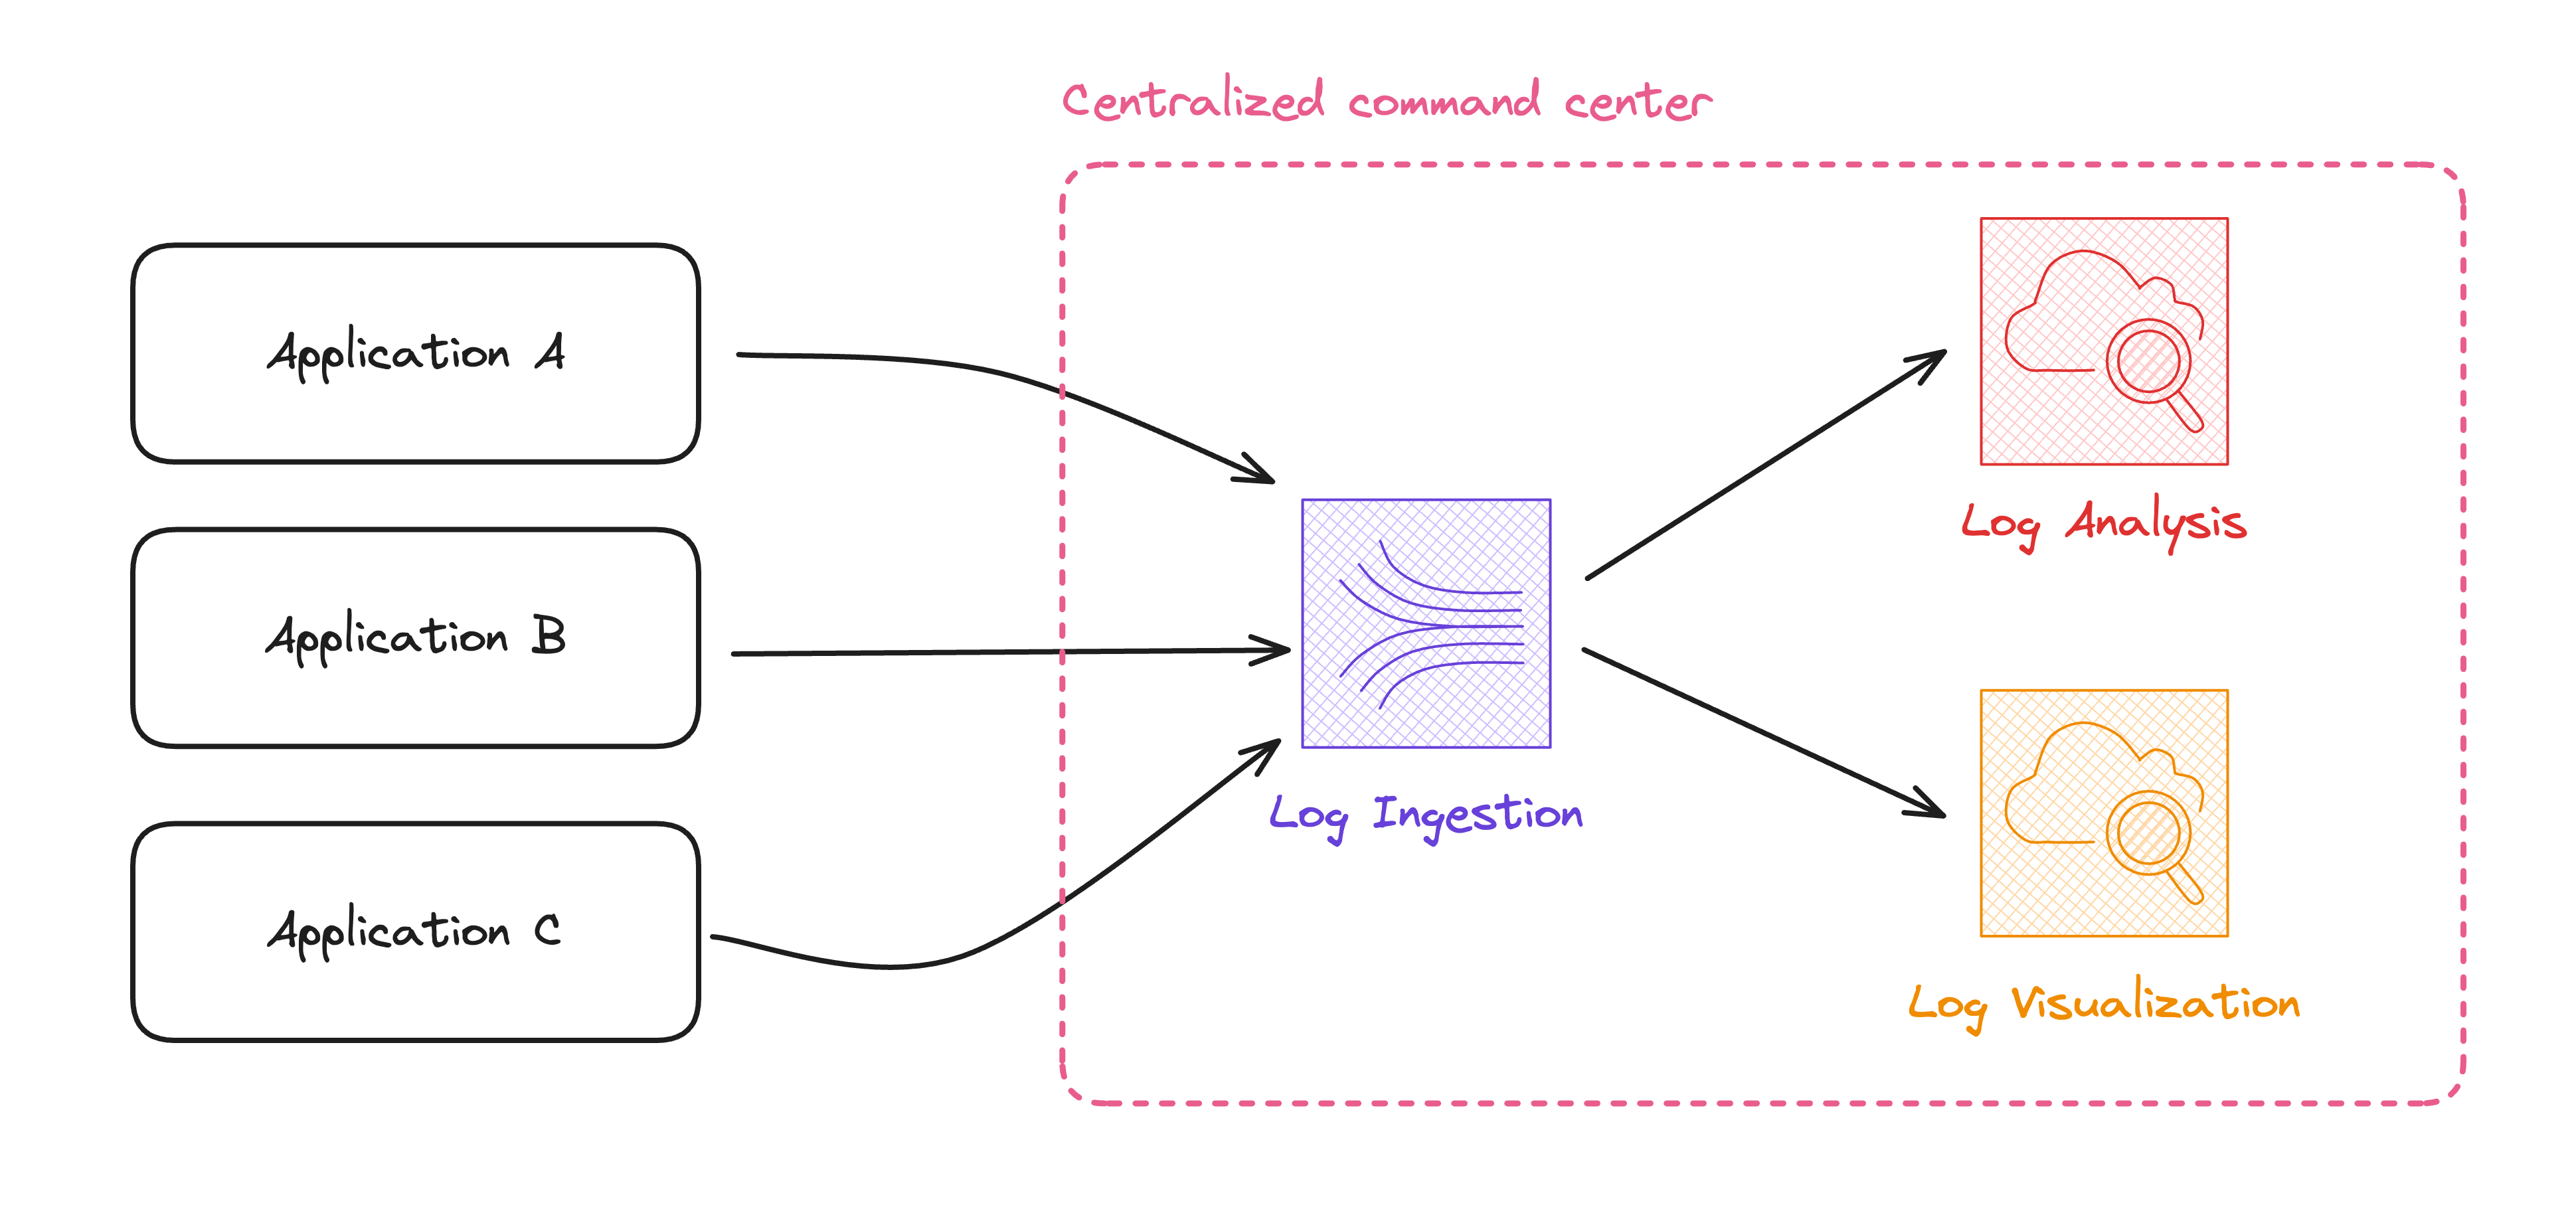 A diagram showing the concept of log ingestion from multiple sources in a centralized command center, with log analysis and log visualization options in the central command center.